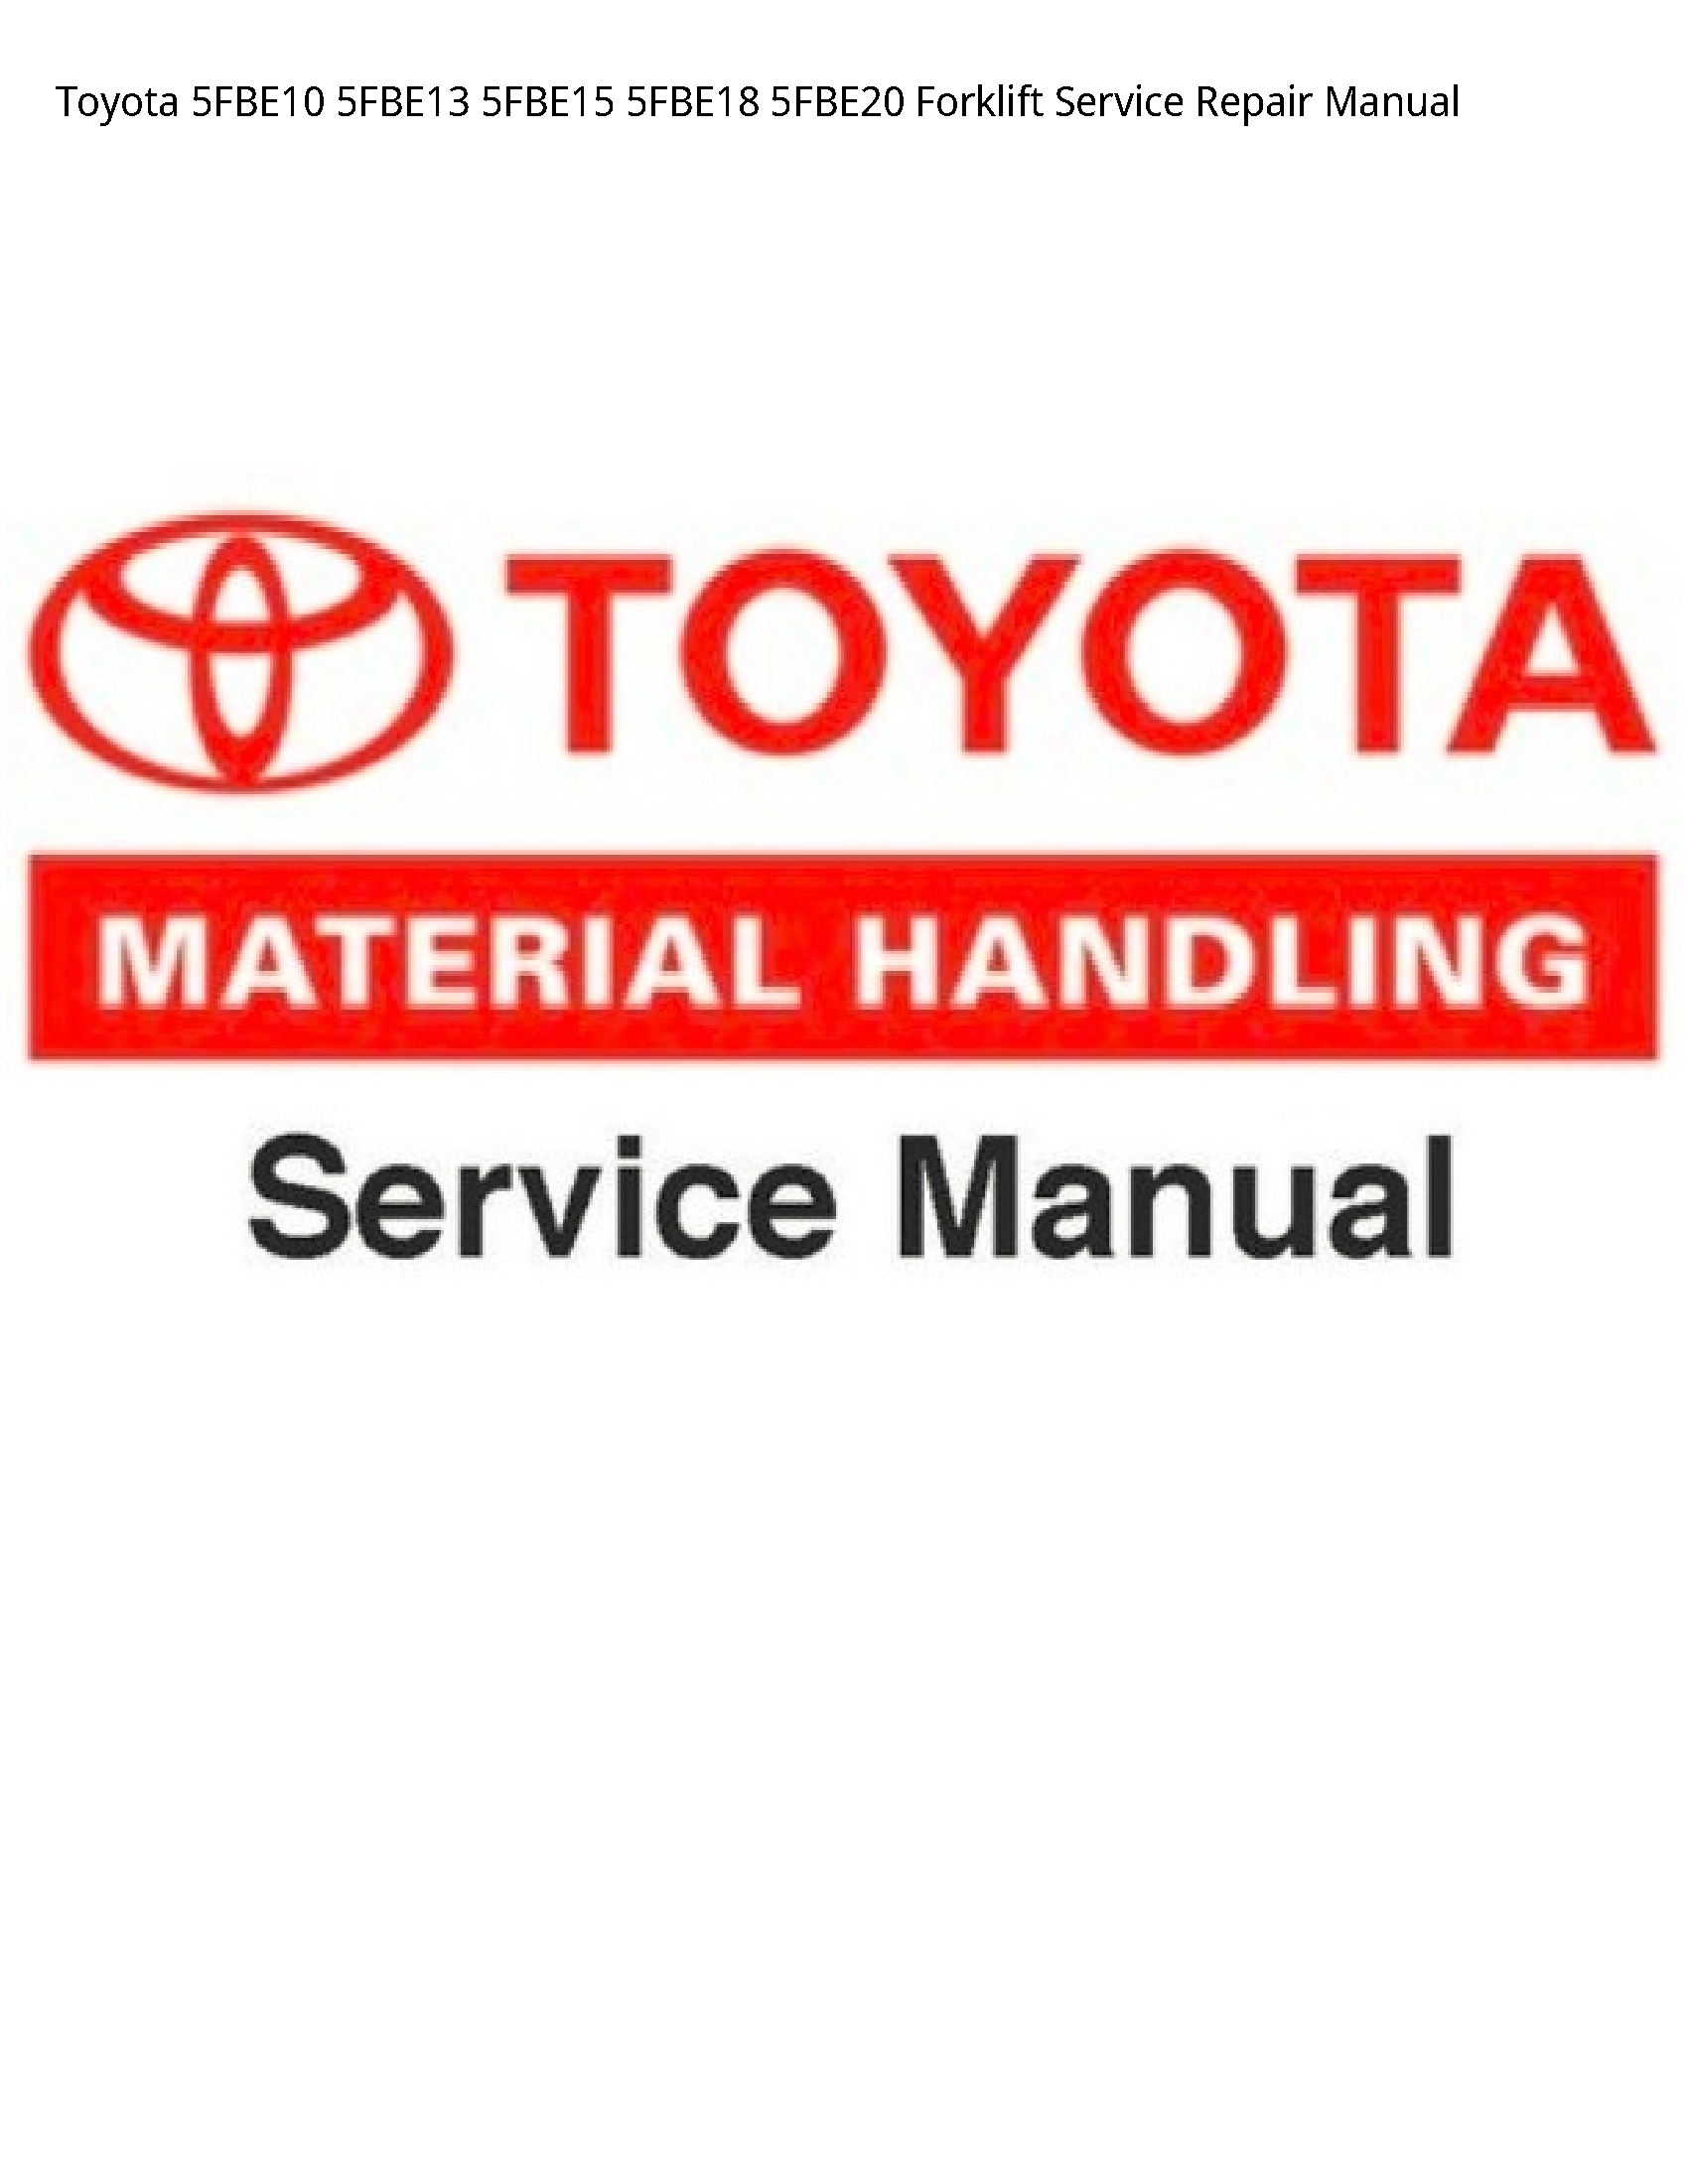 Toyota 5FBE10 Forklift manual